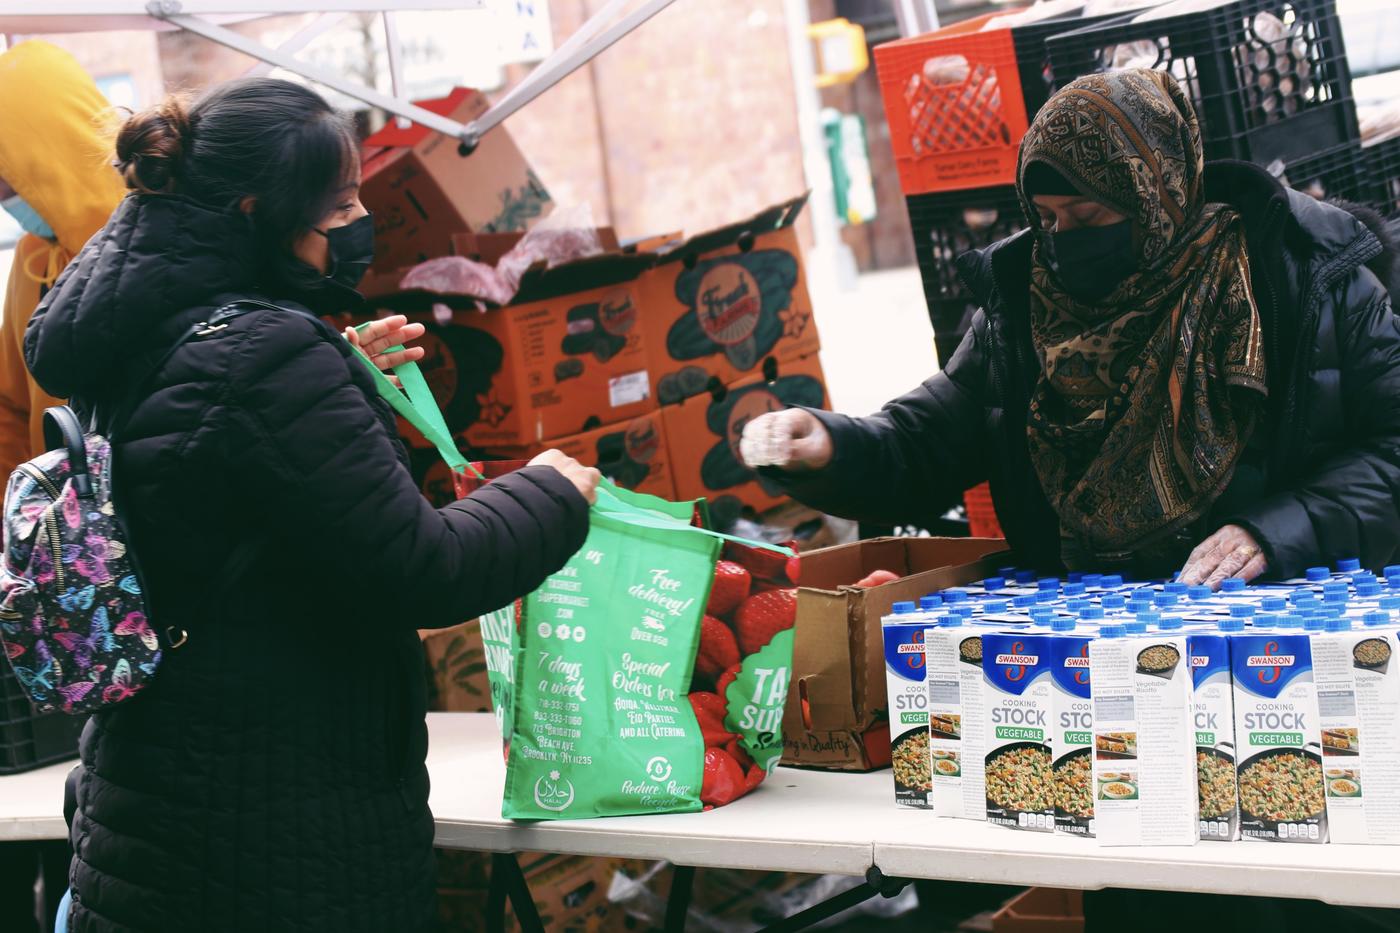 A volunteer handing out food items to a person who accesses the pantry in Brooklyn.